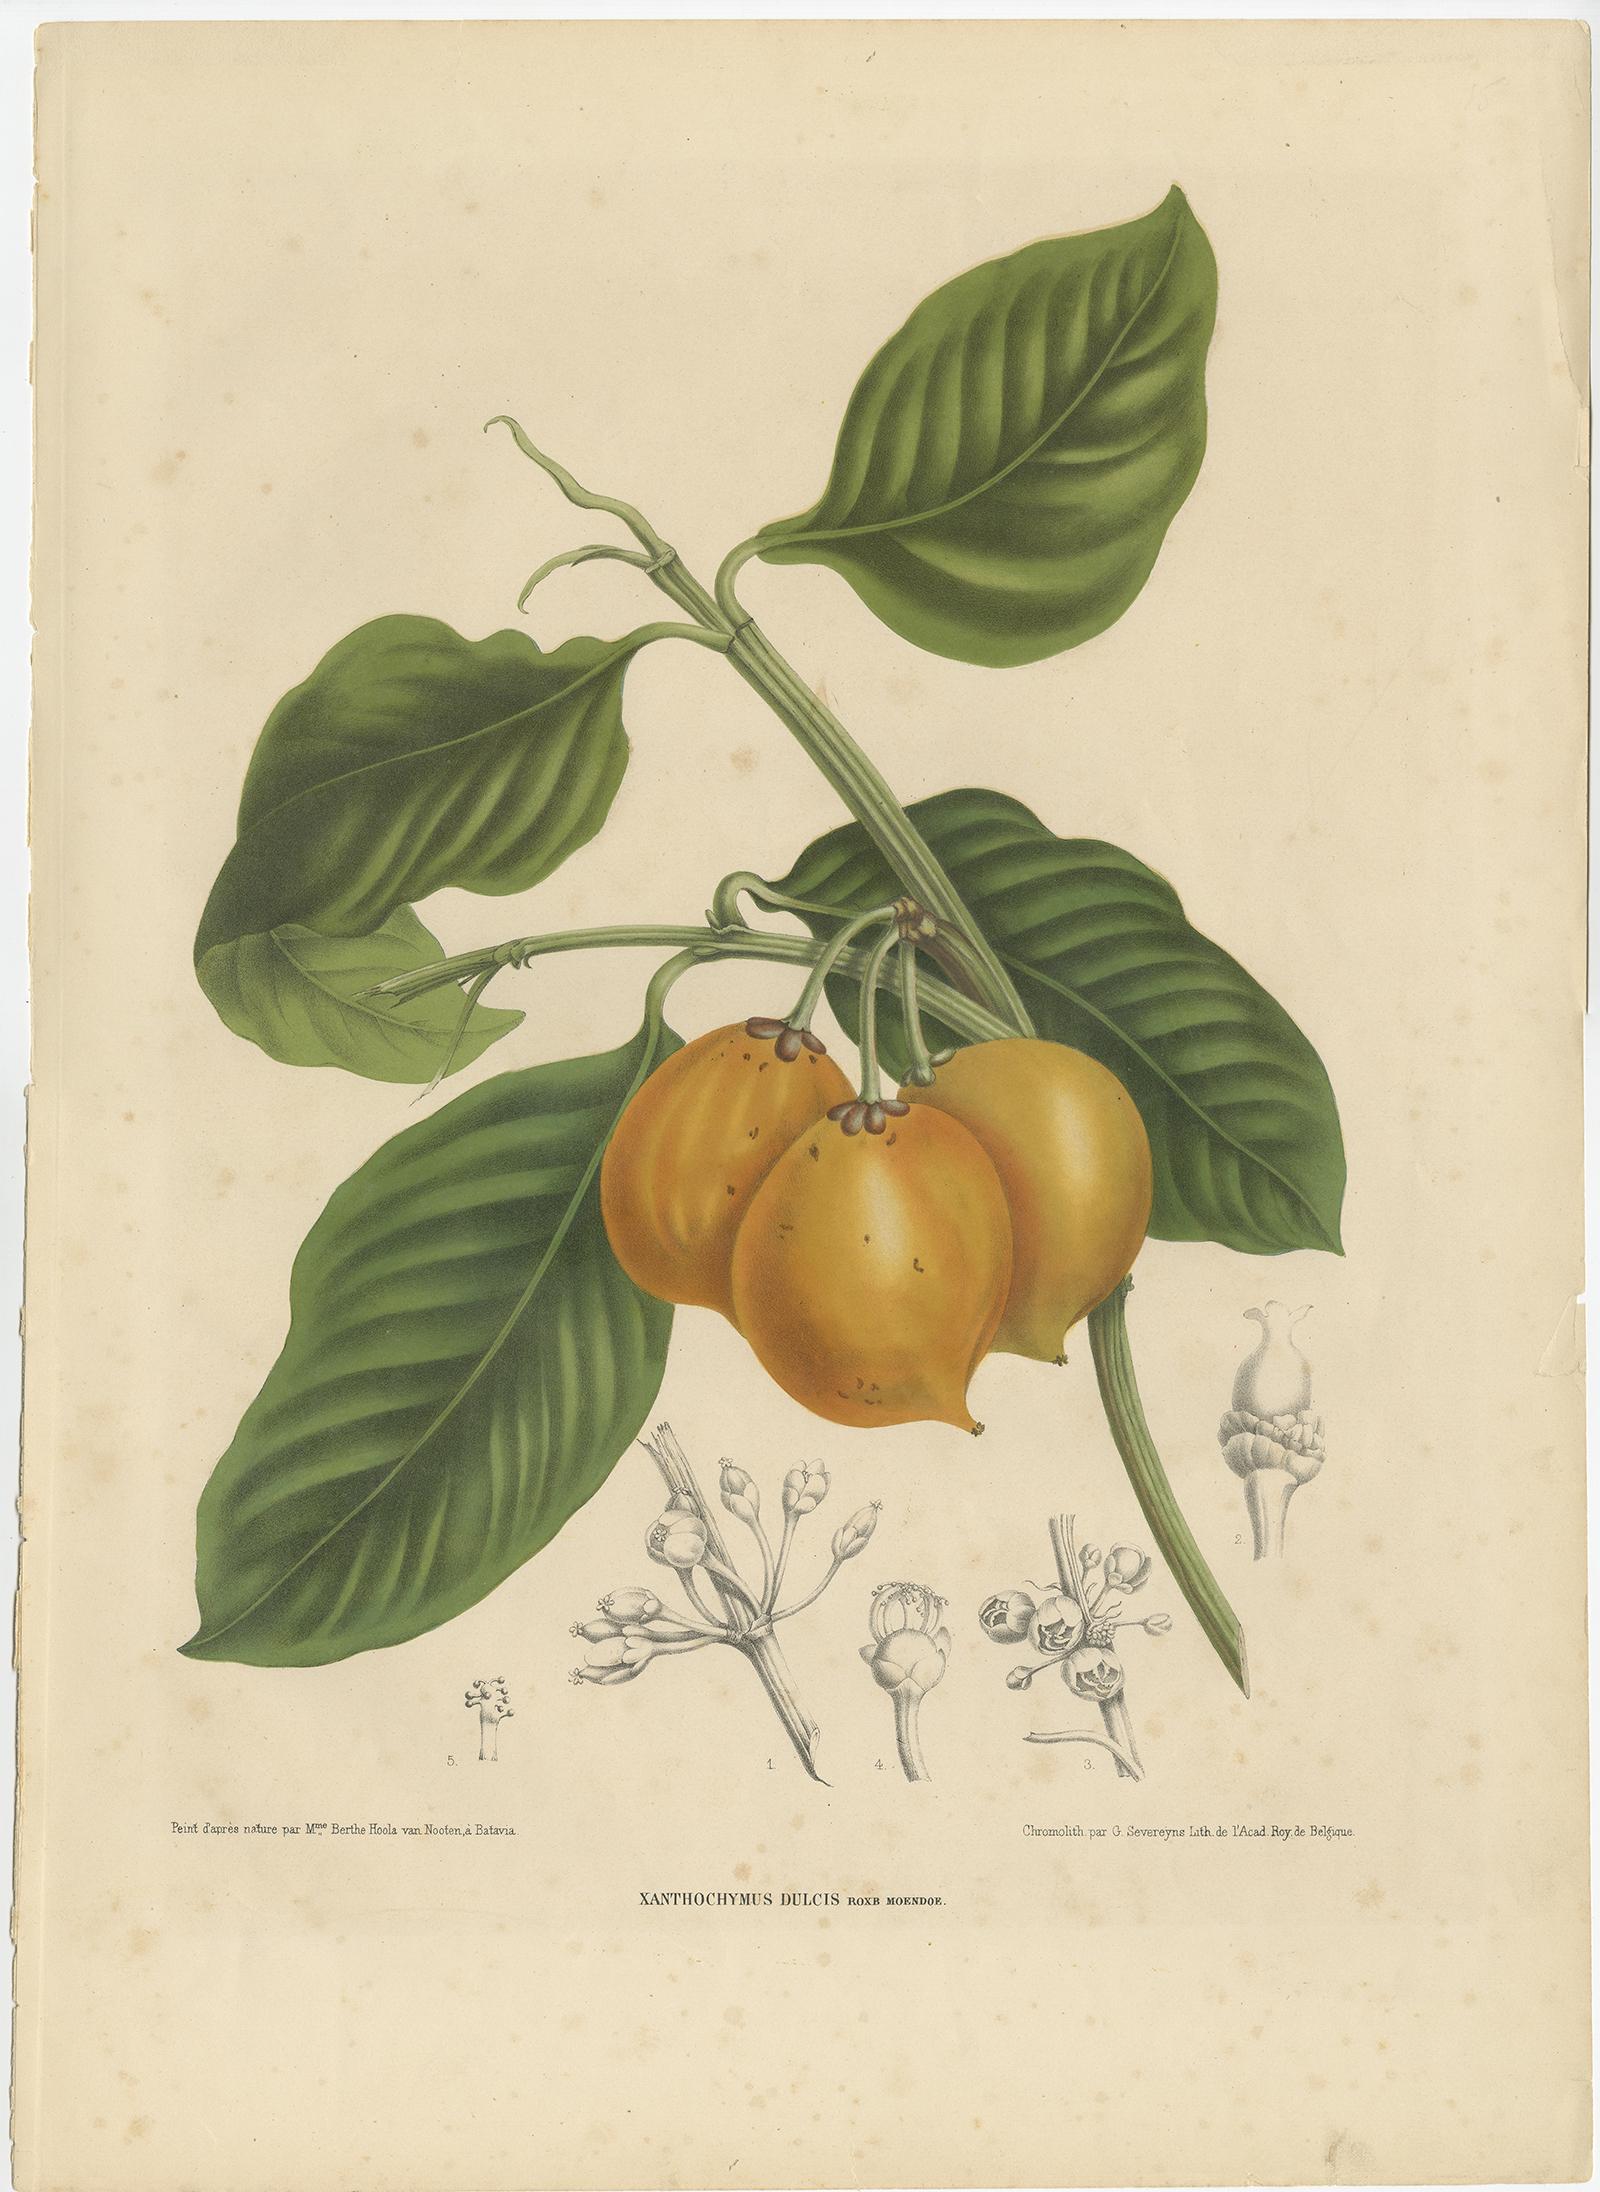 Set of two antique prints titled 'Citrus Decumana' and 'Xanthochymus Dulcis'. It depicts the citrus decumana and xanthochymus dulcis. The citrus decumana is a tree from Southeast Asia producing large fruits resembling grapefruits. The xanthochymus